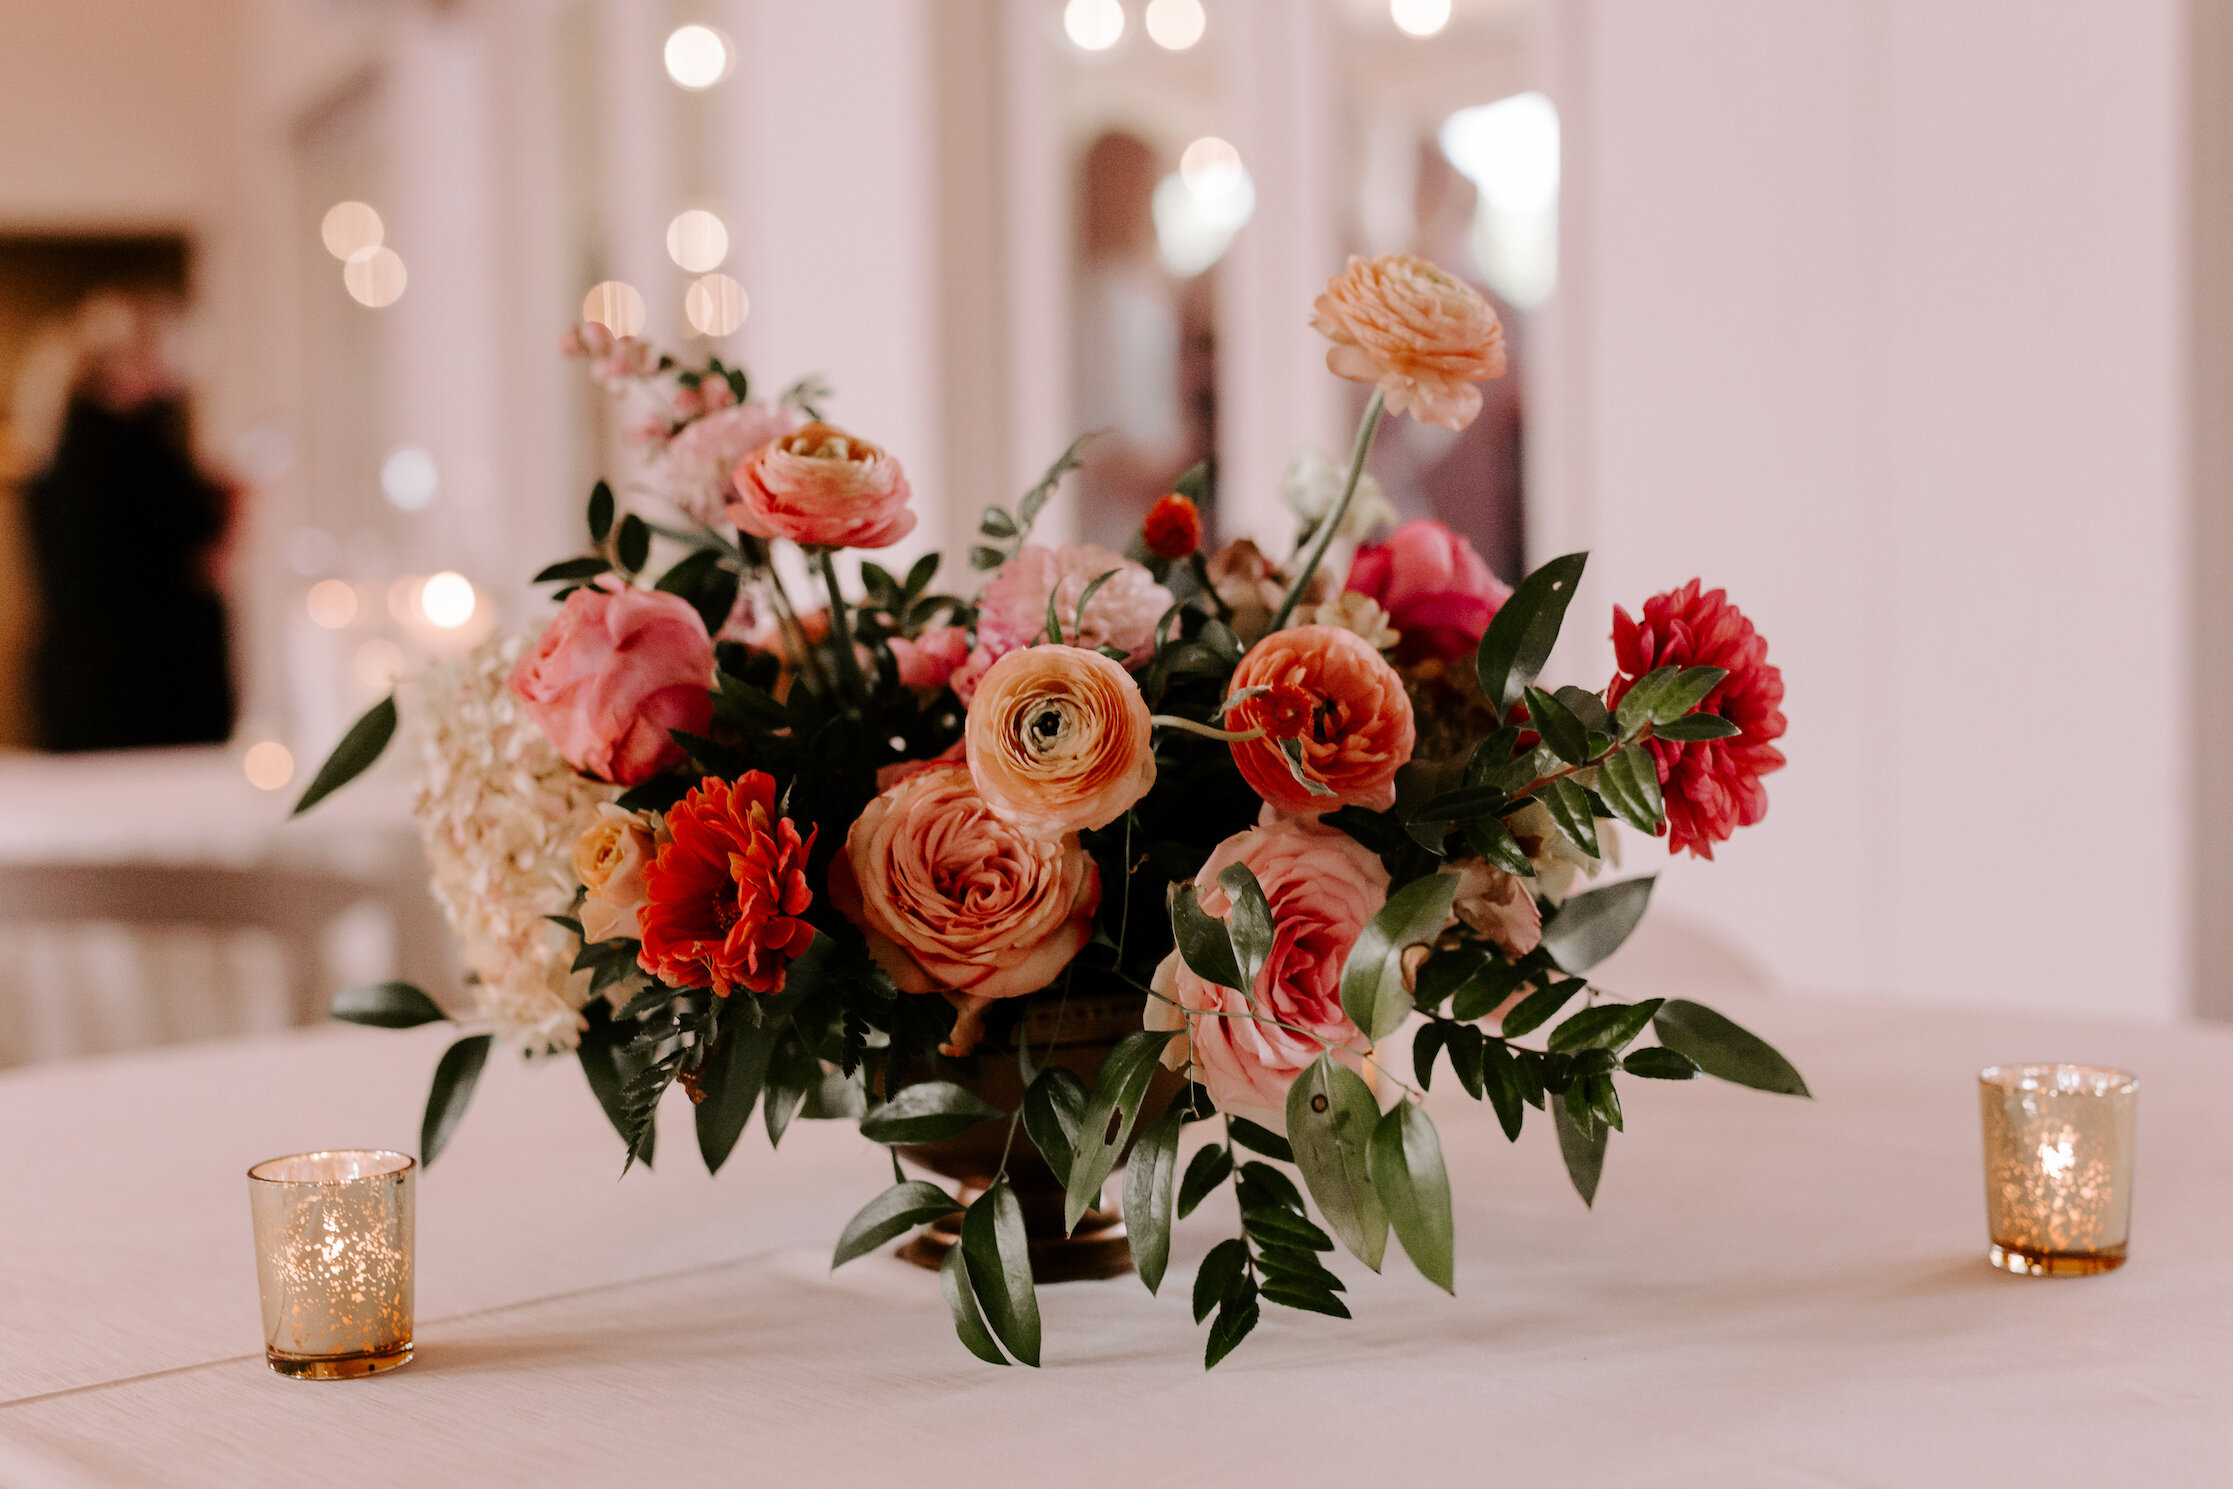 Bright and summery centerpieces filled with coral zinnias, fuchsia and blush dahlias, tangerine ranunculus, petal-heavy roses, pink snowberry, fluffy hydrangea, and sprawling smilax vine. Designed by Nashville wedding floral designer, Rosemary & Fin…